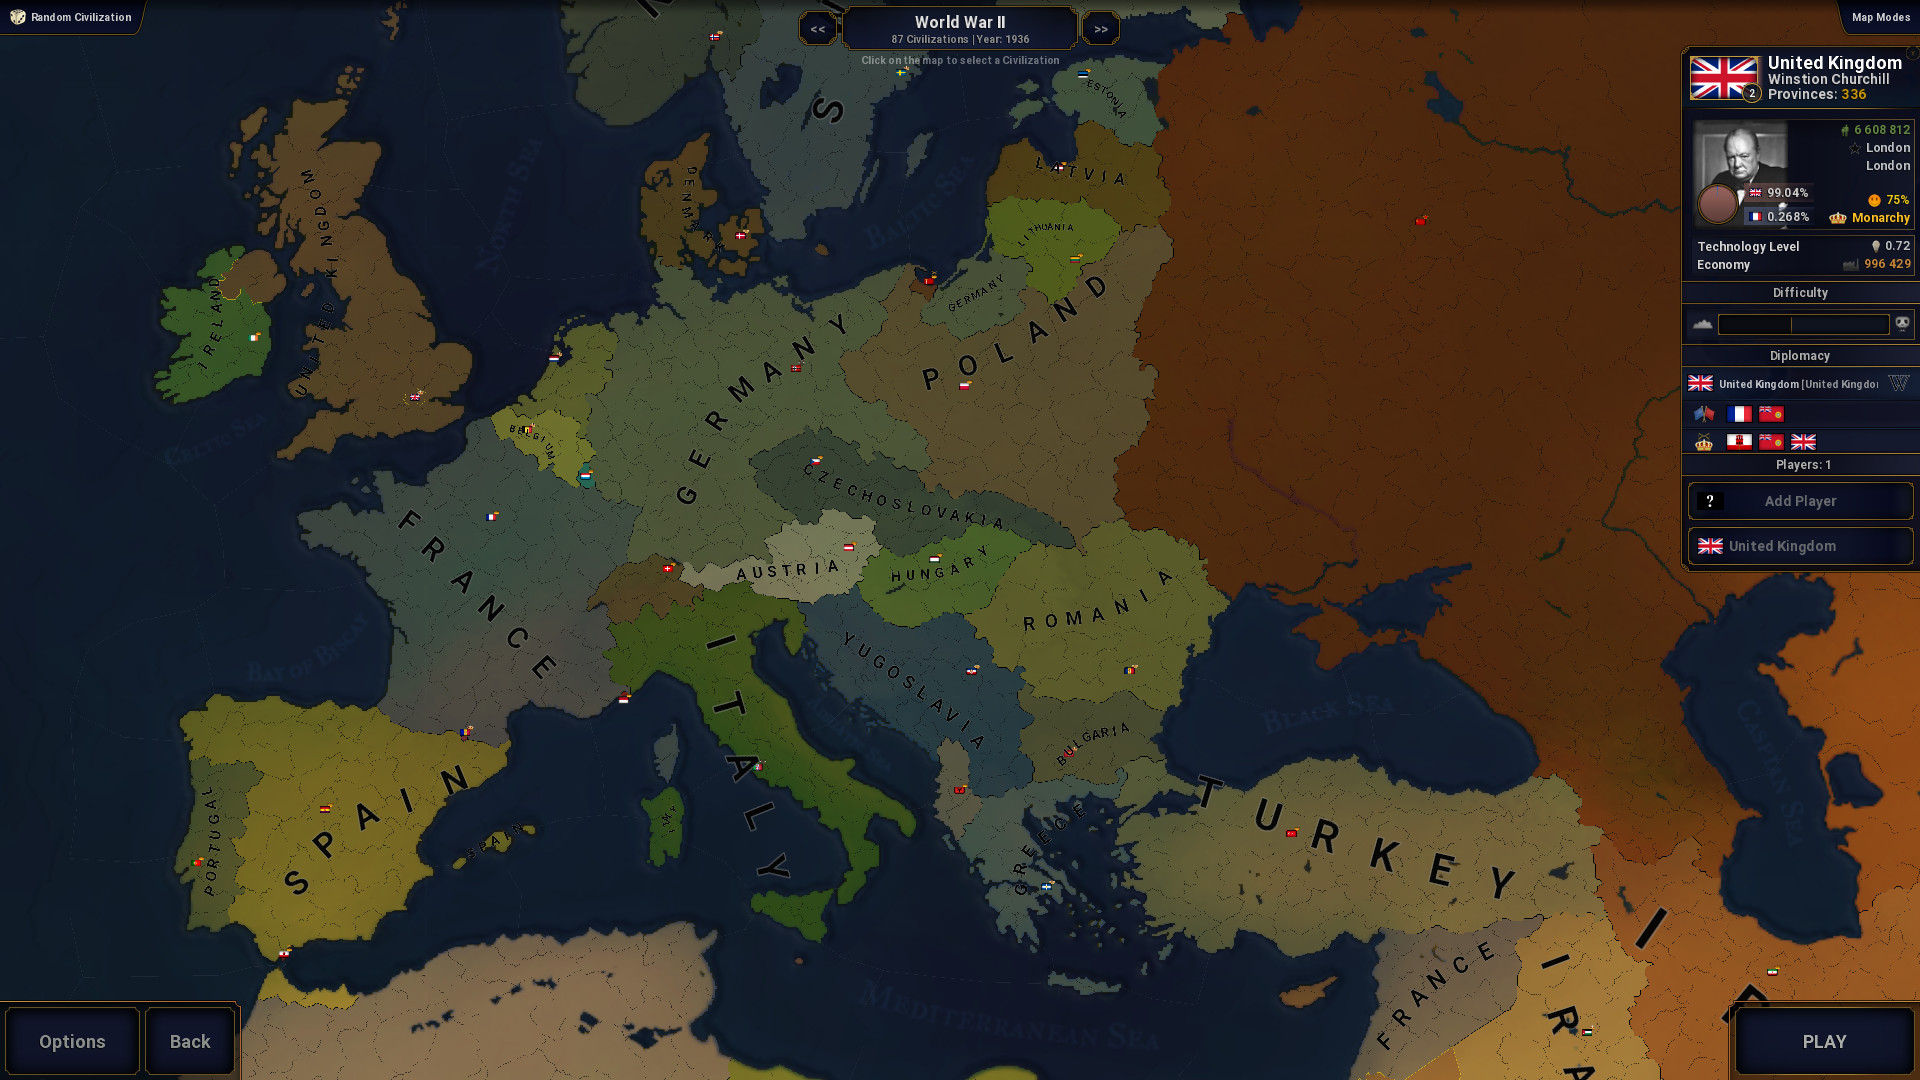 Age of Civilizations II Free Download